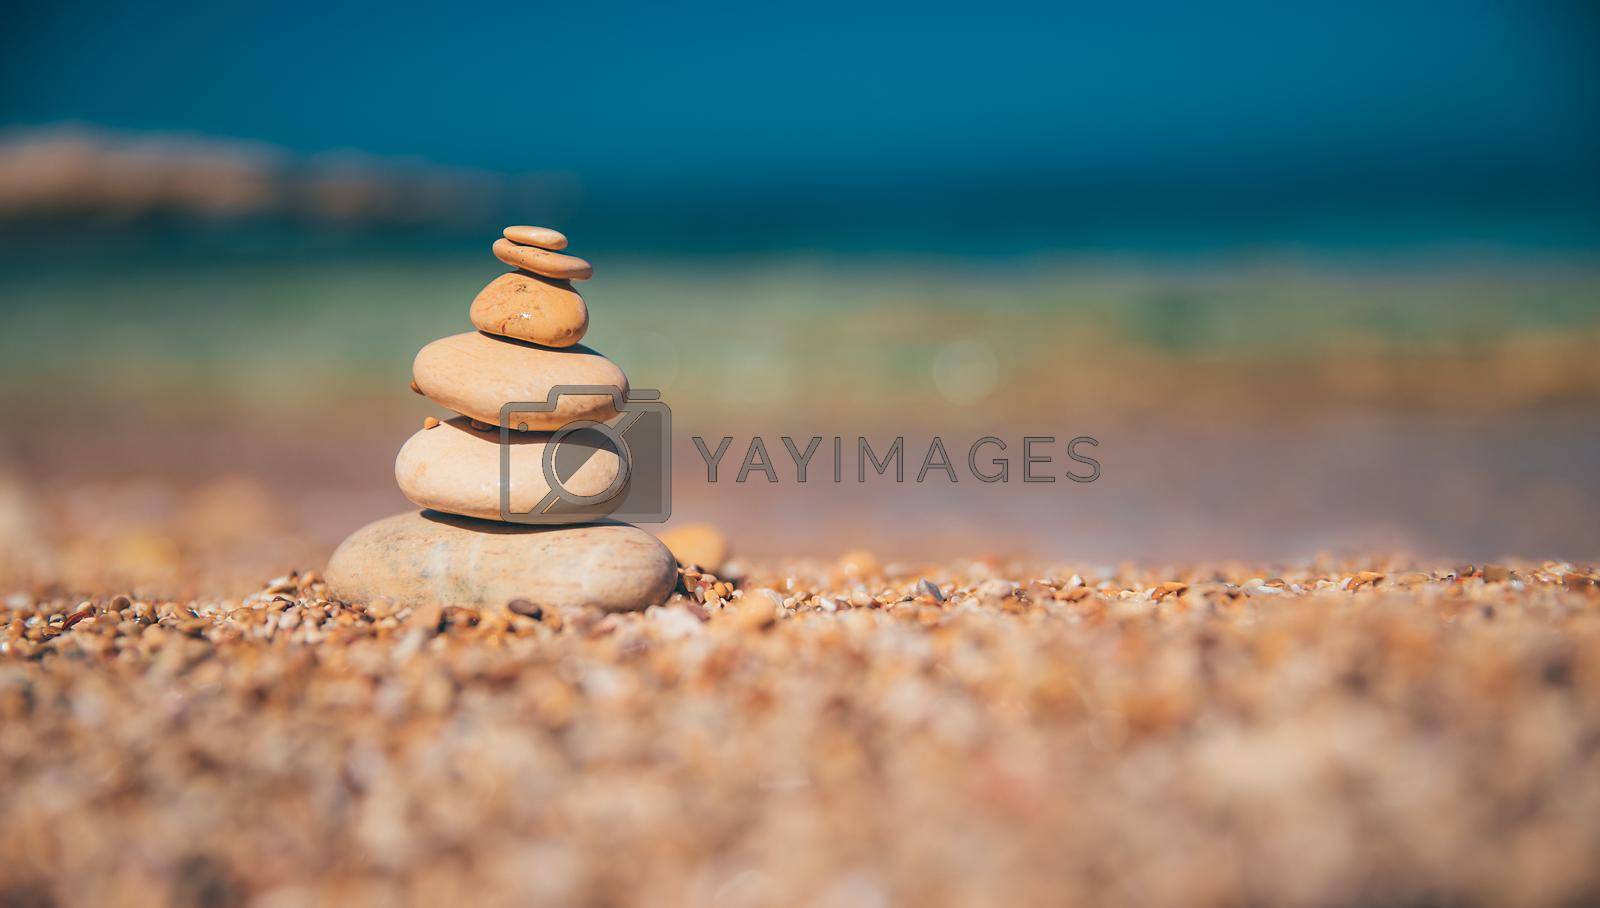 Royalty free image of Spa Pebbles on the Beach by Anna_Omelchenko